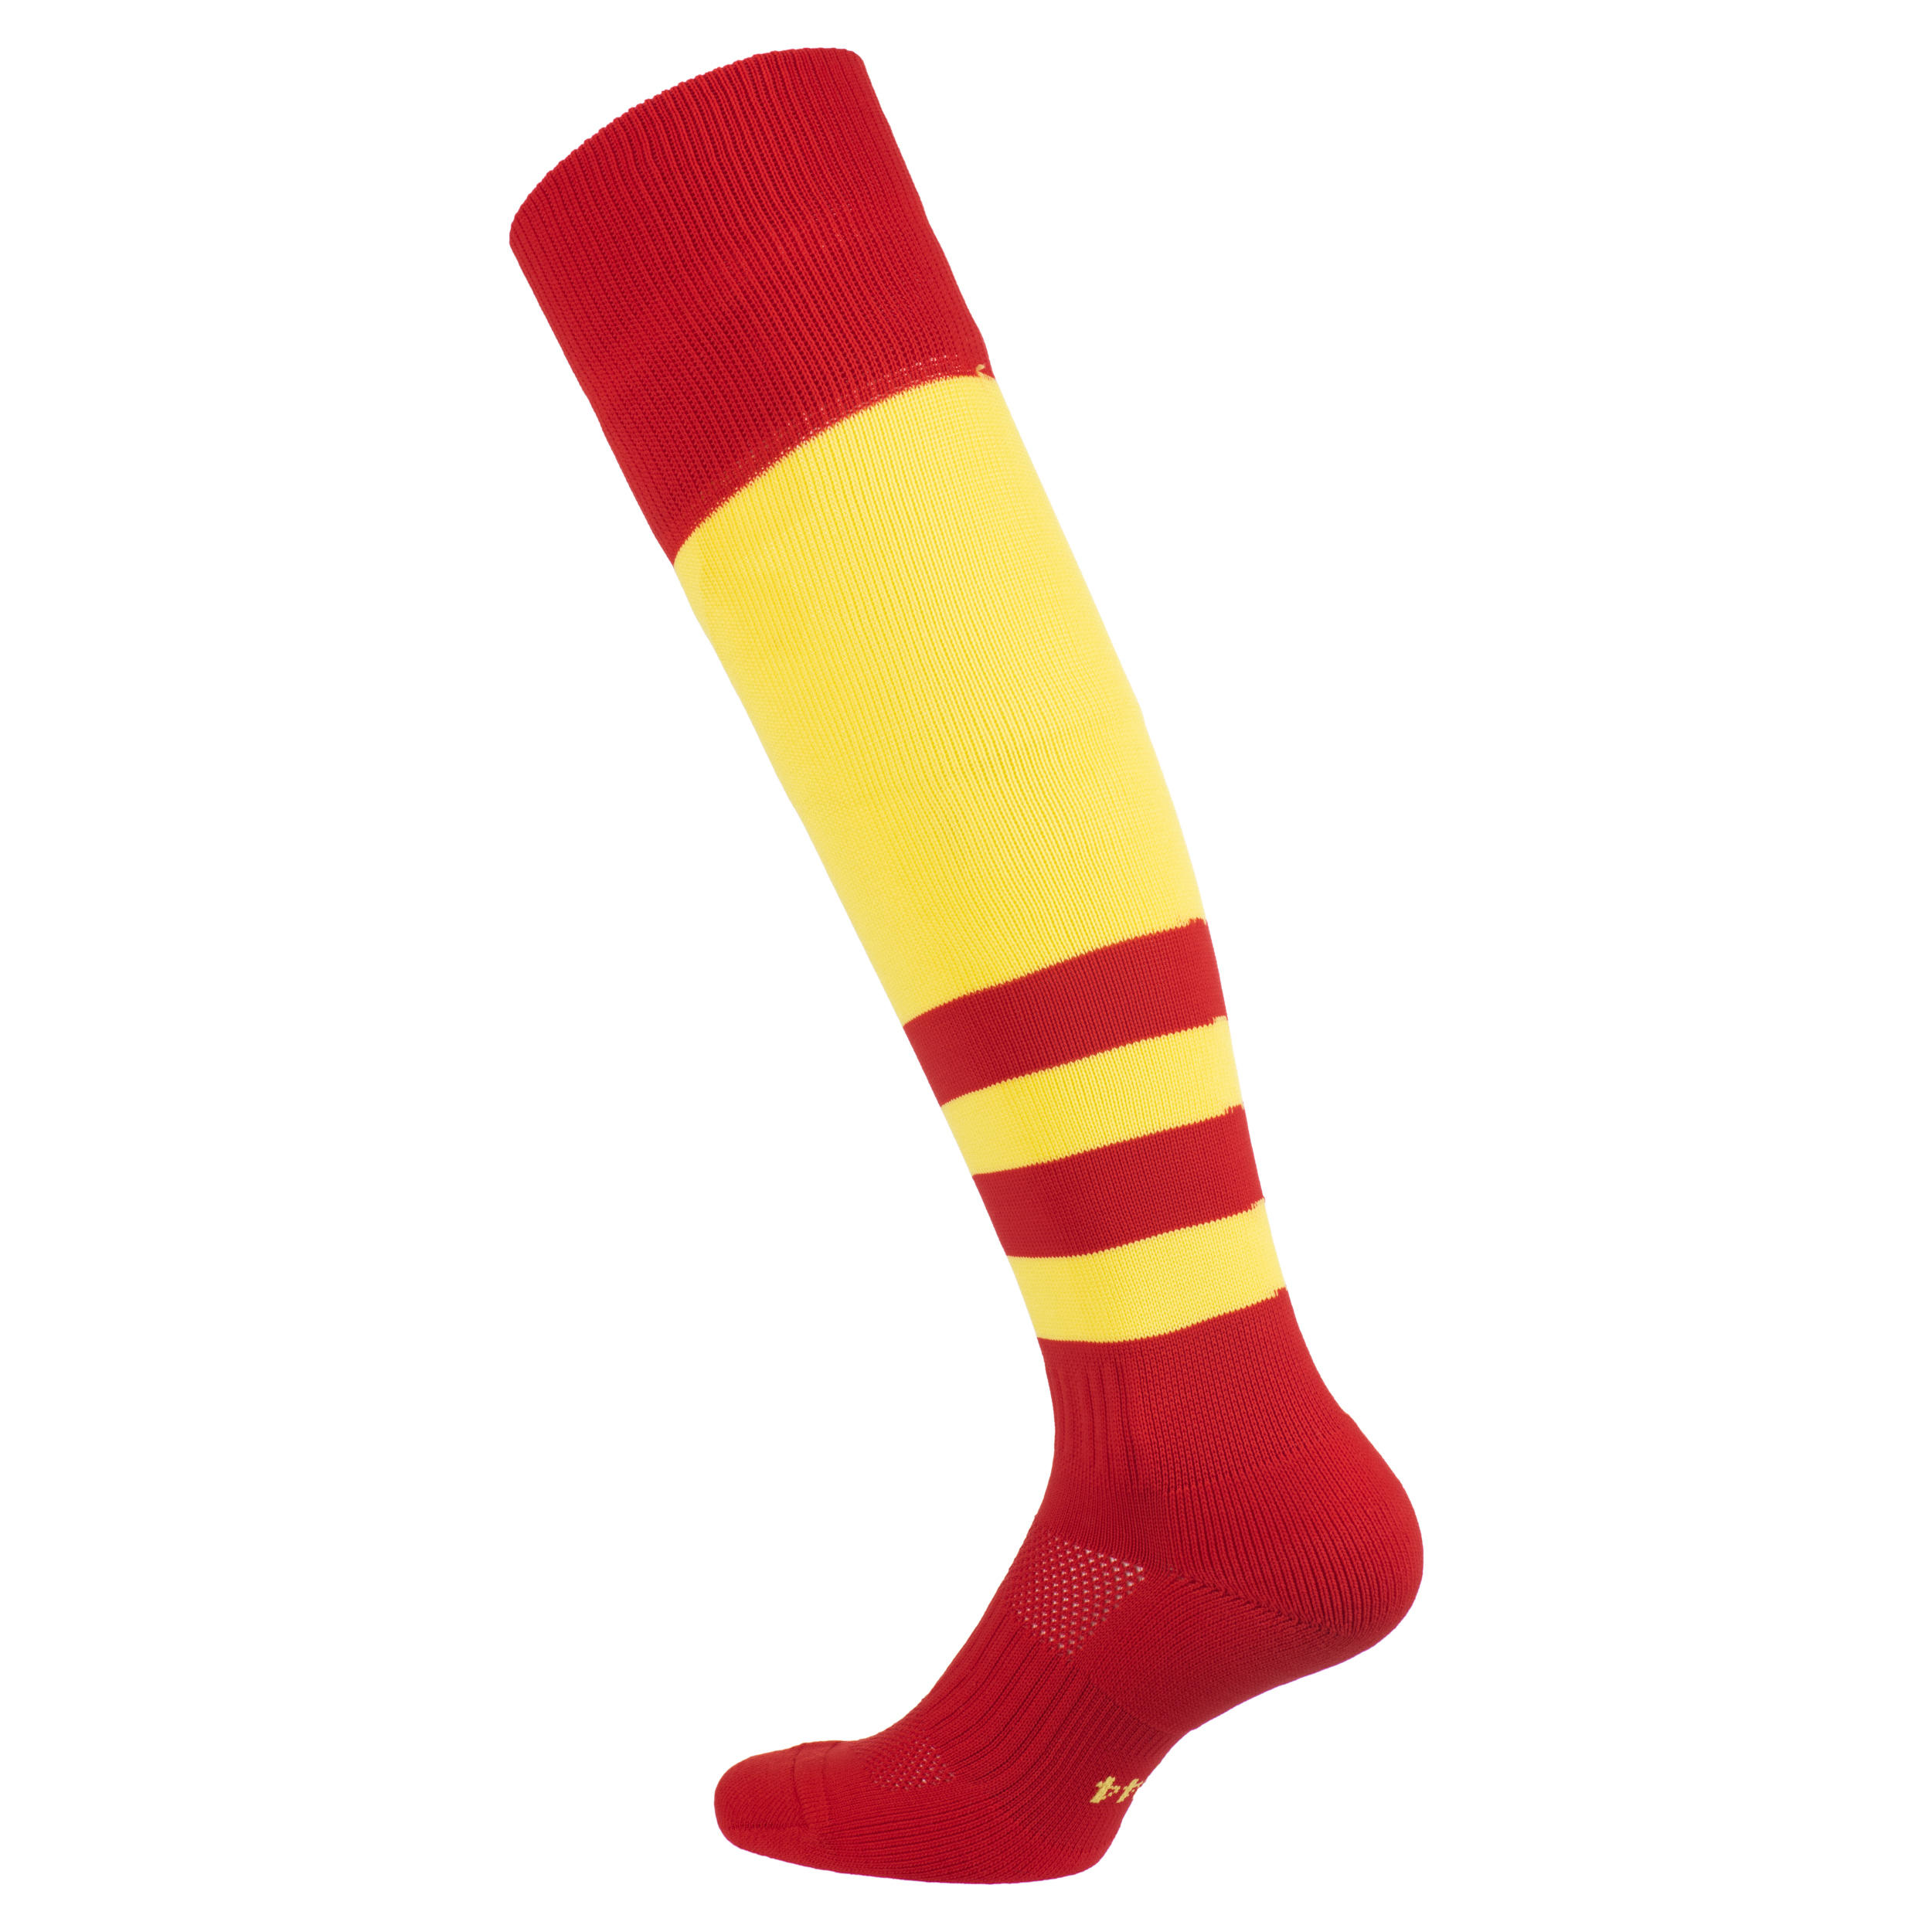 Kids' High Rugby Socks R500 - Red/Yellow 2/5